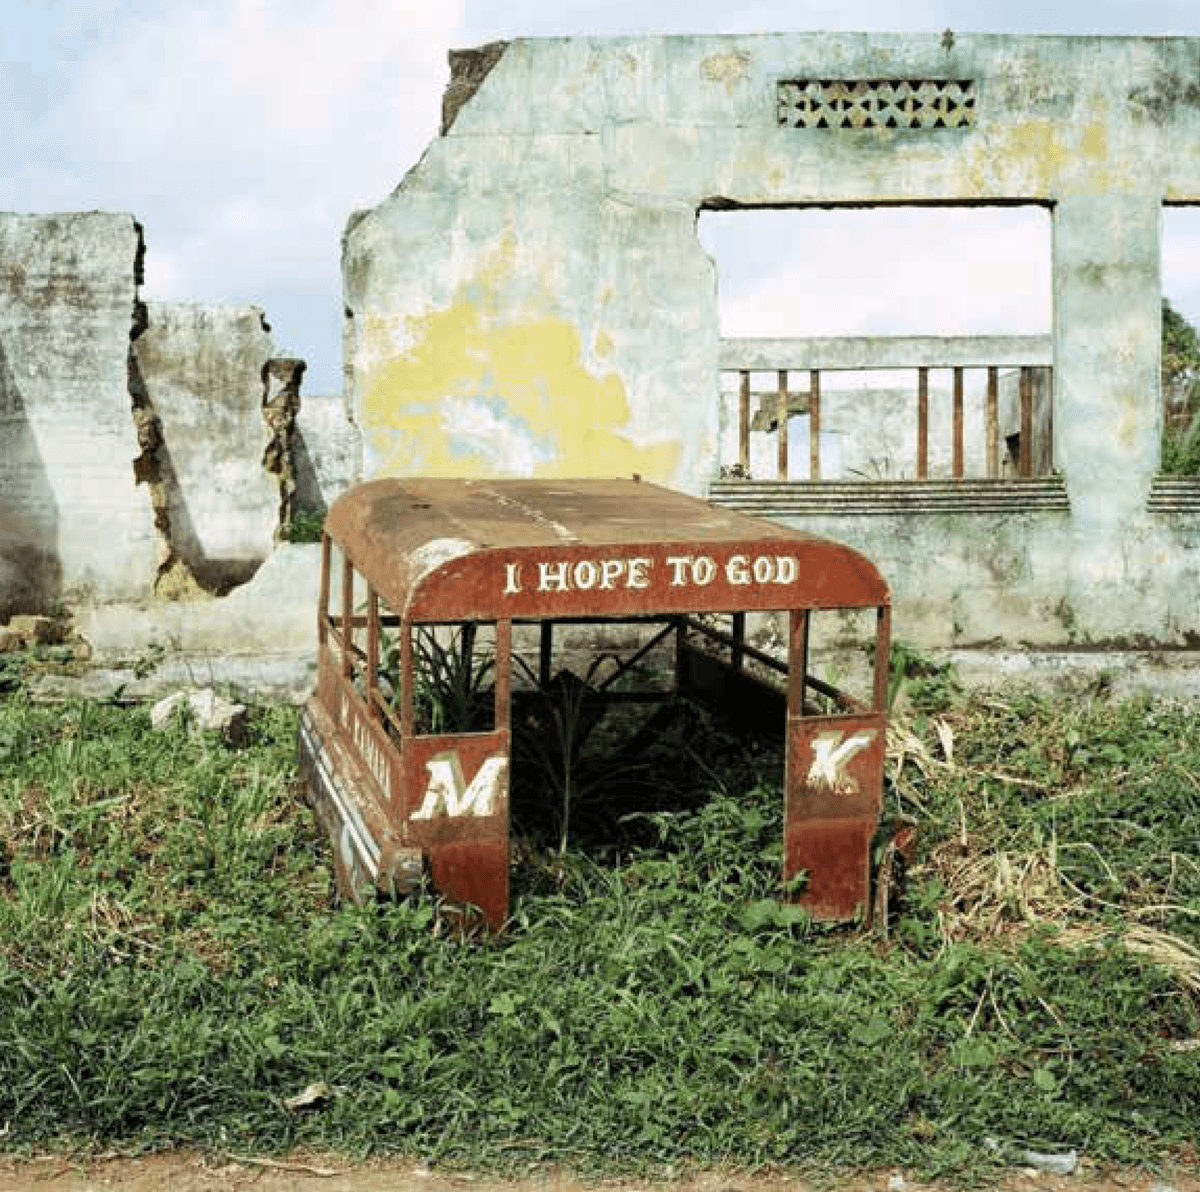 War damage in the mining town of Koidu, in May 2002, following the end of civil war in Sierra Leone